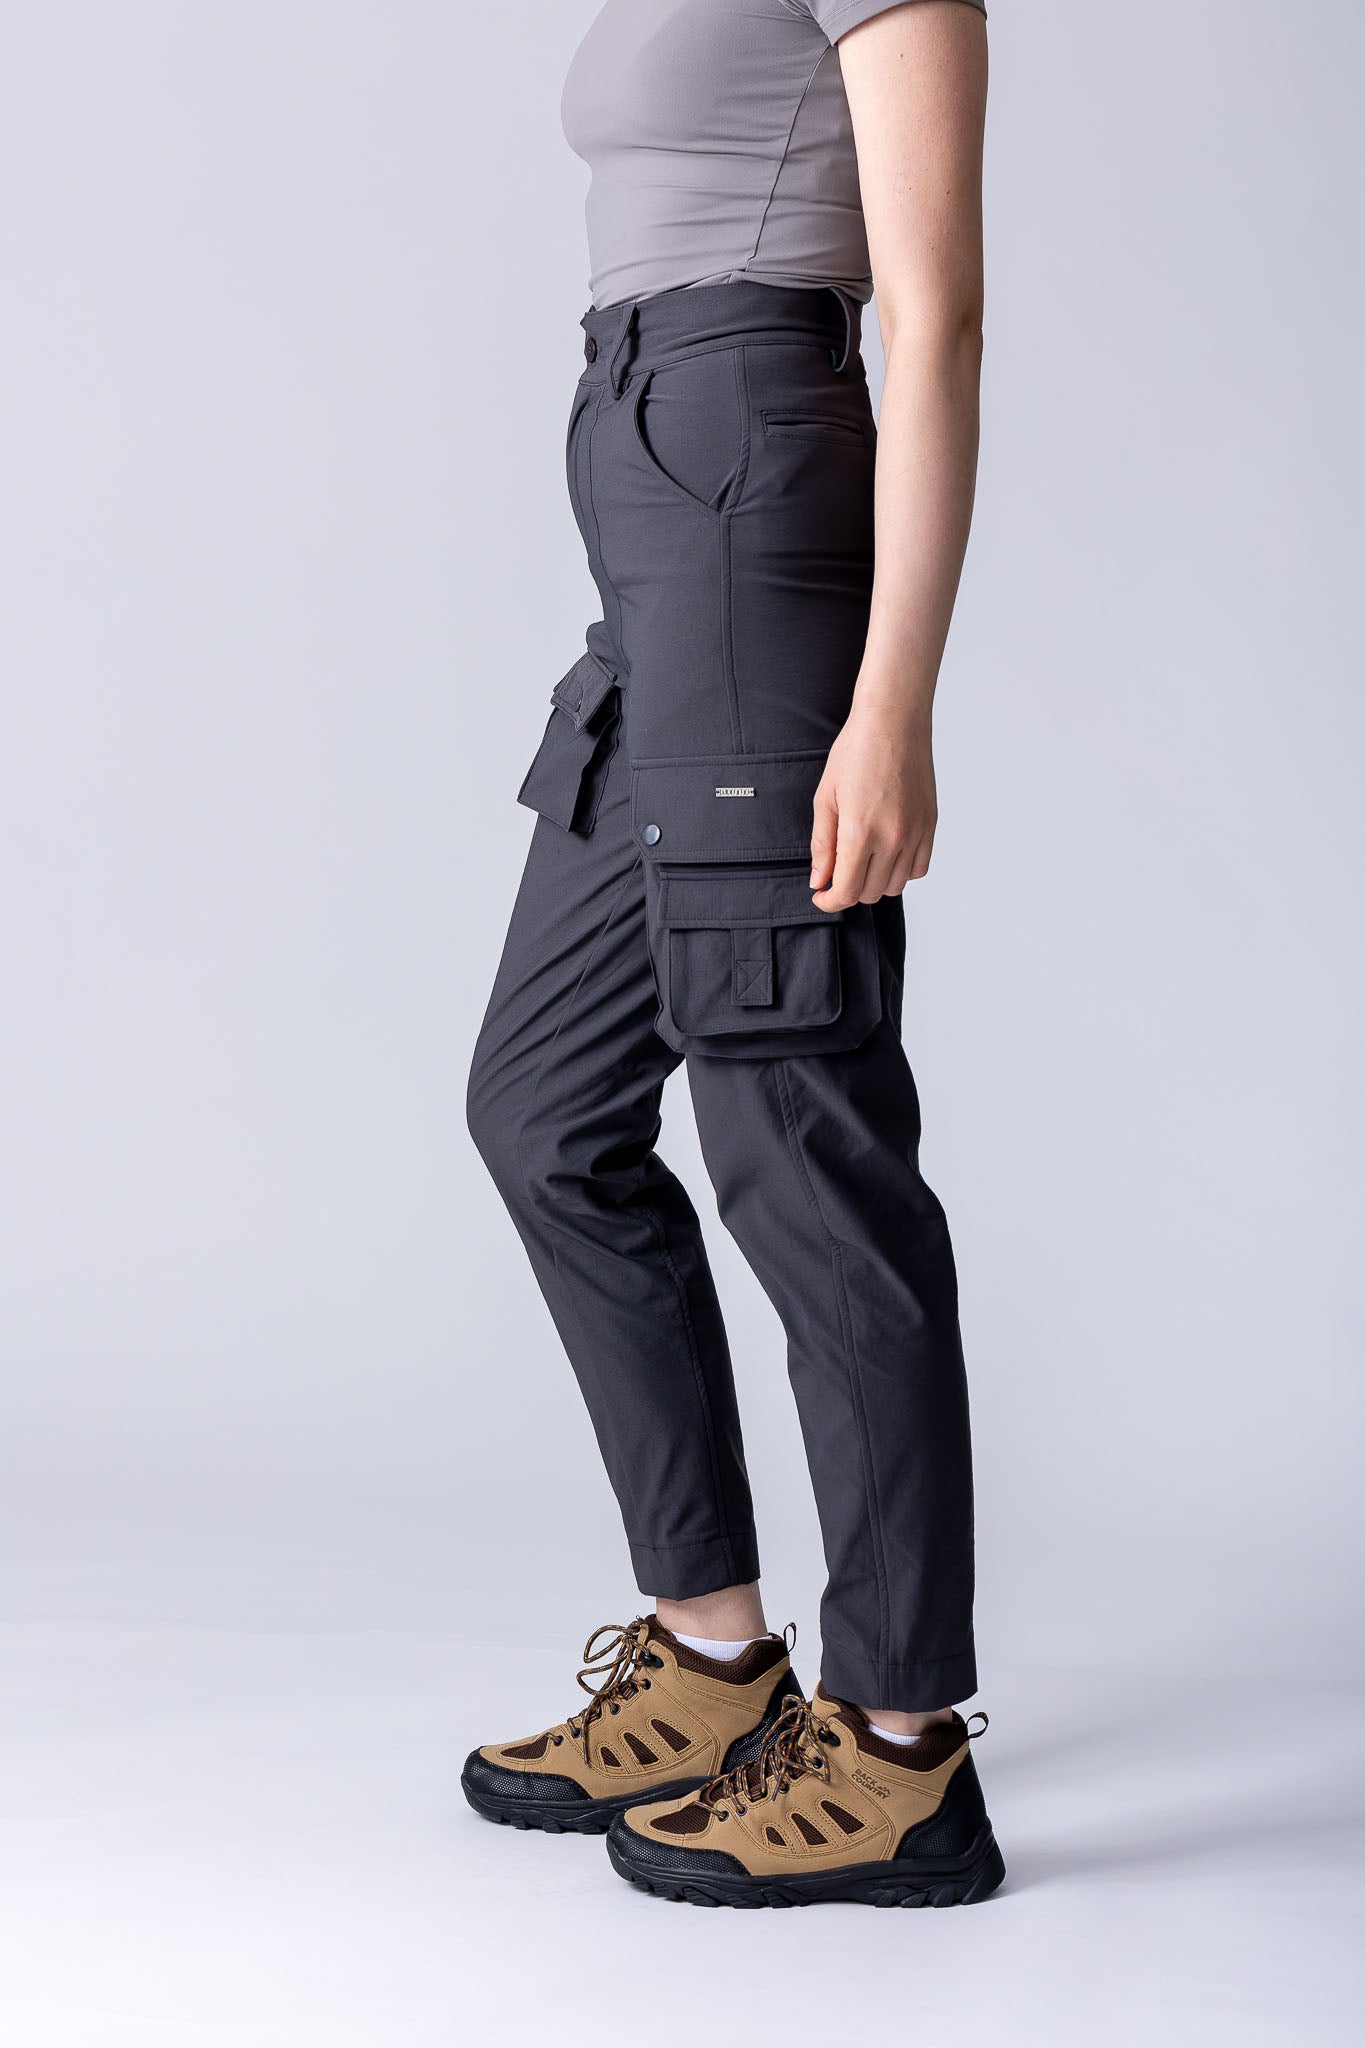 Safari cargo pants in charcoal. With stretchy fabric, extra leg pockets and back pockets. 